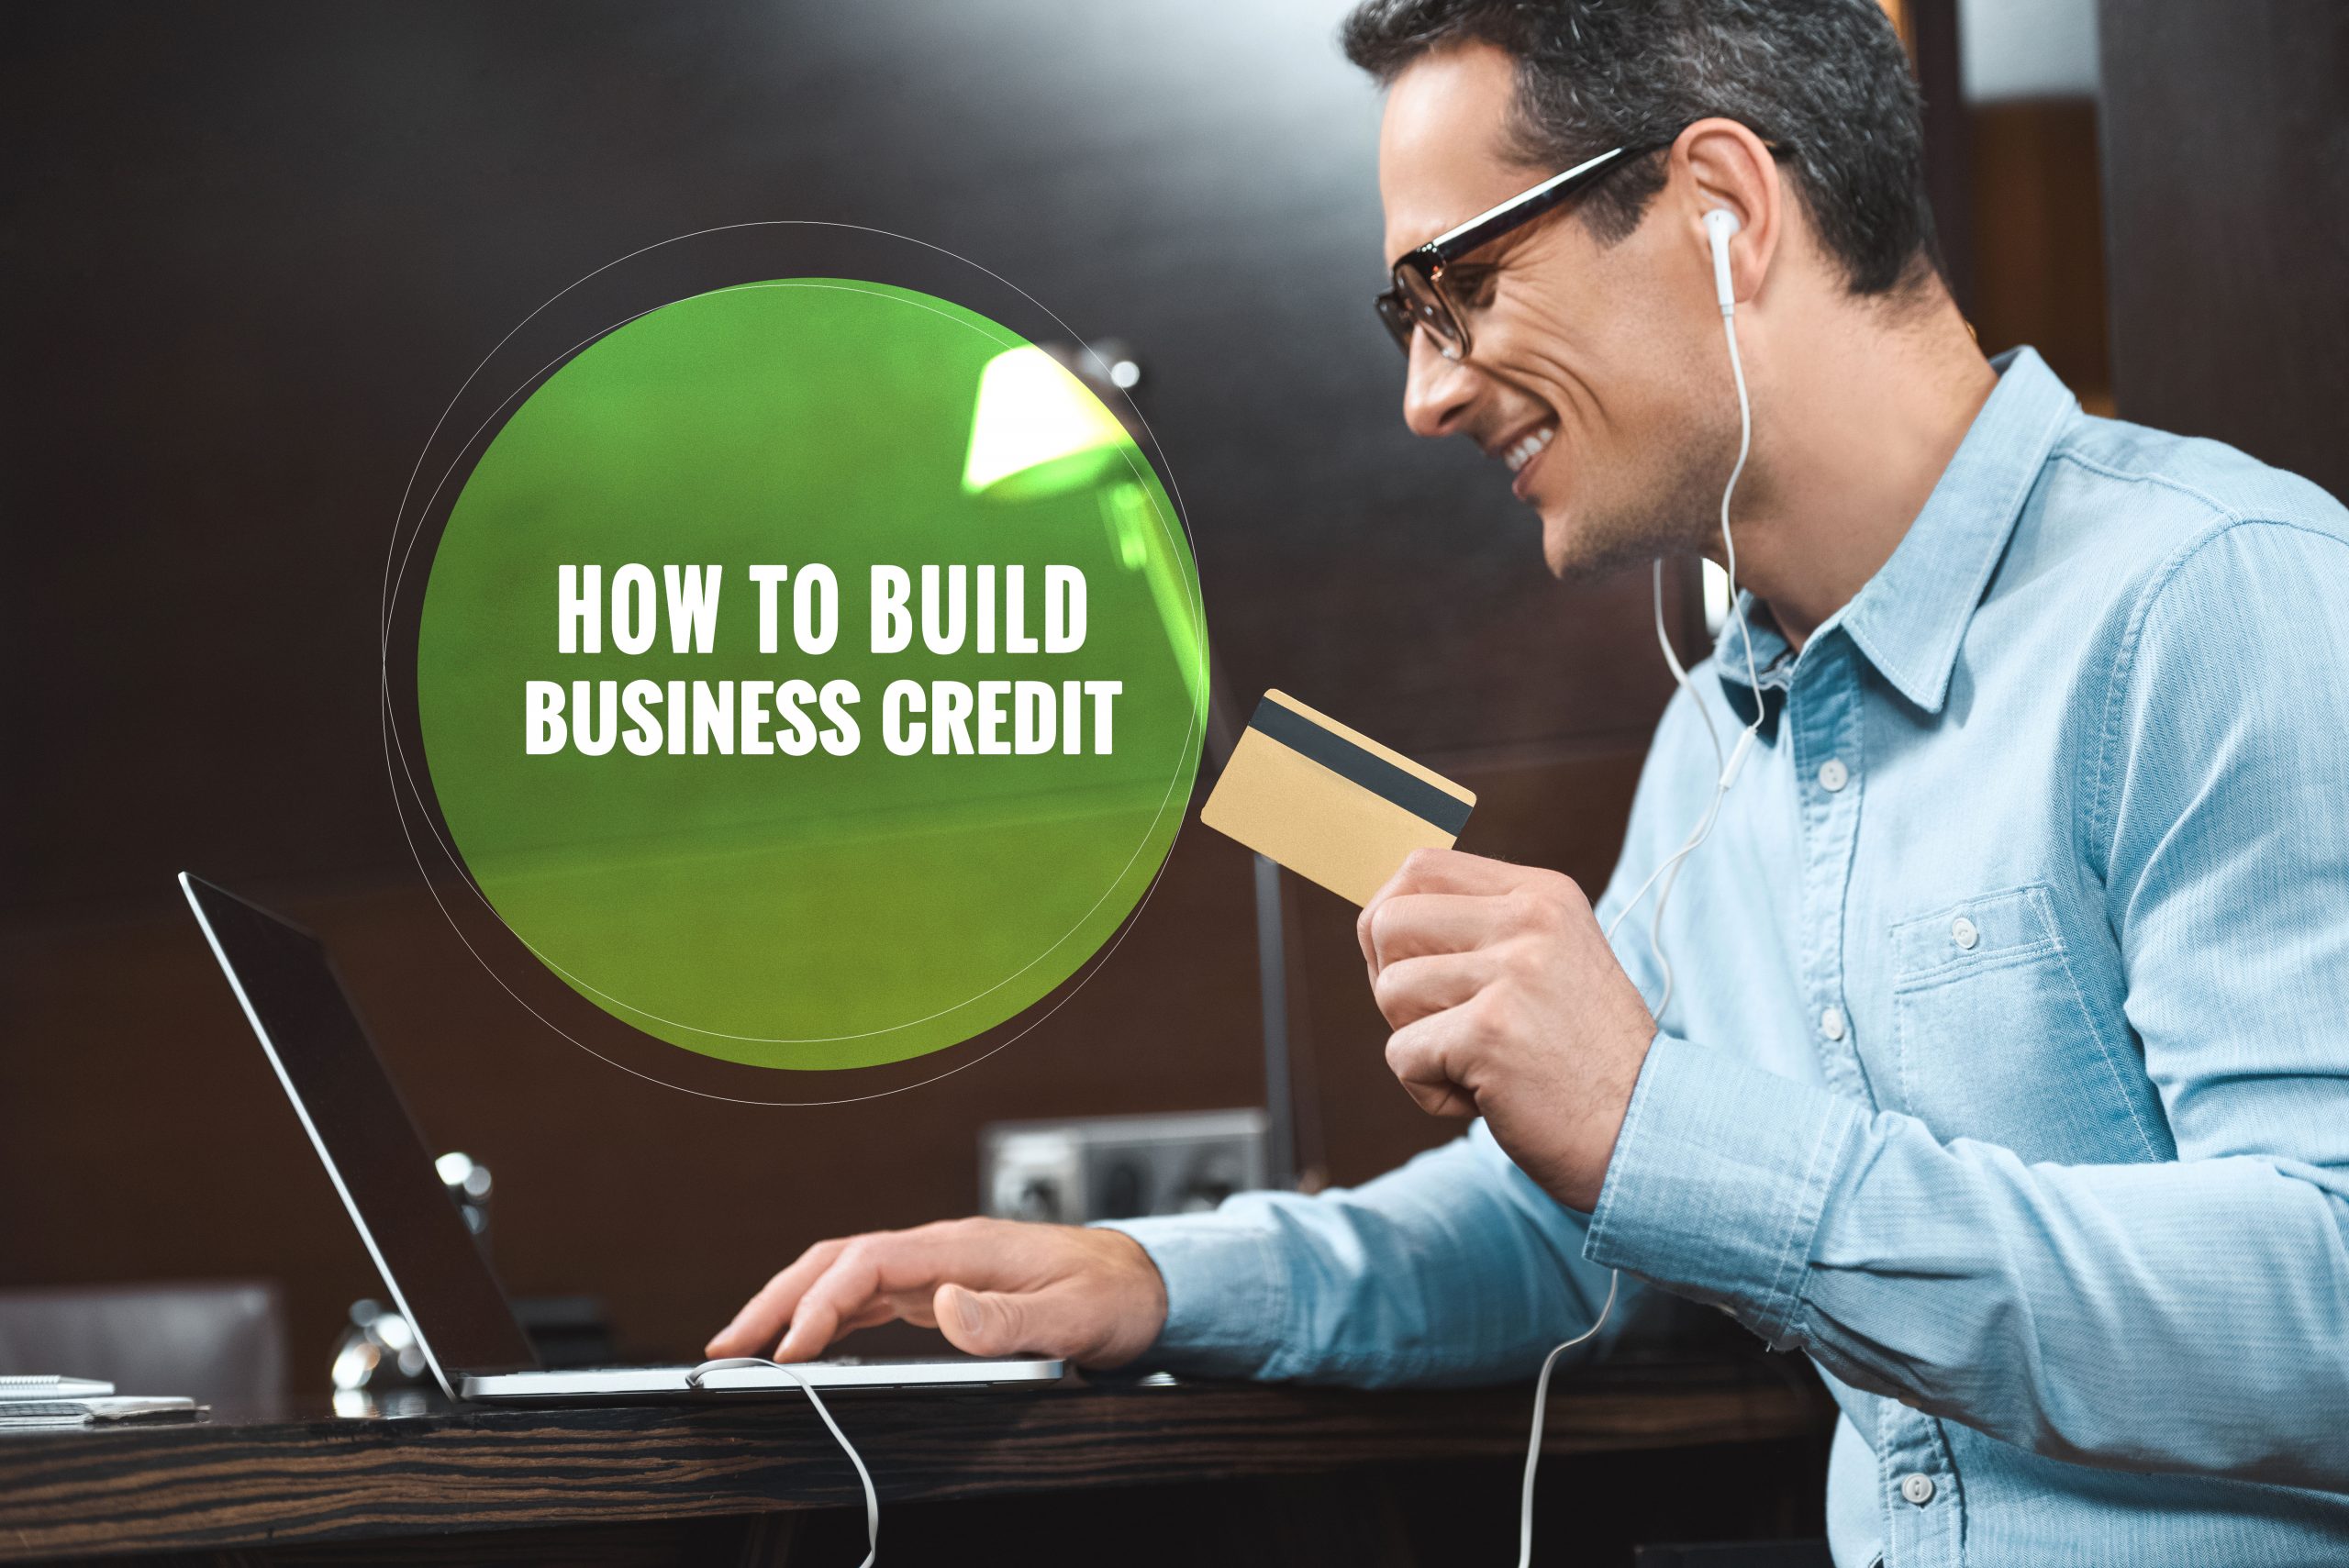 How to Build Business Credit?